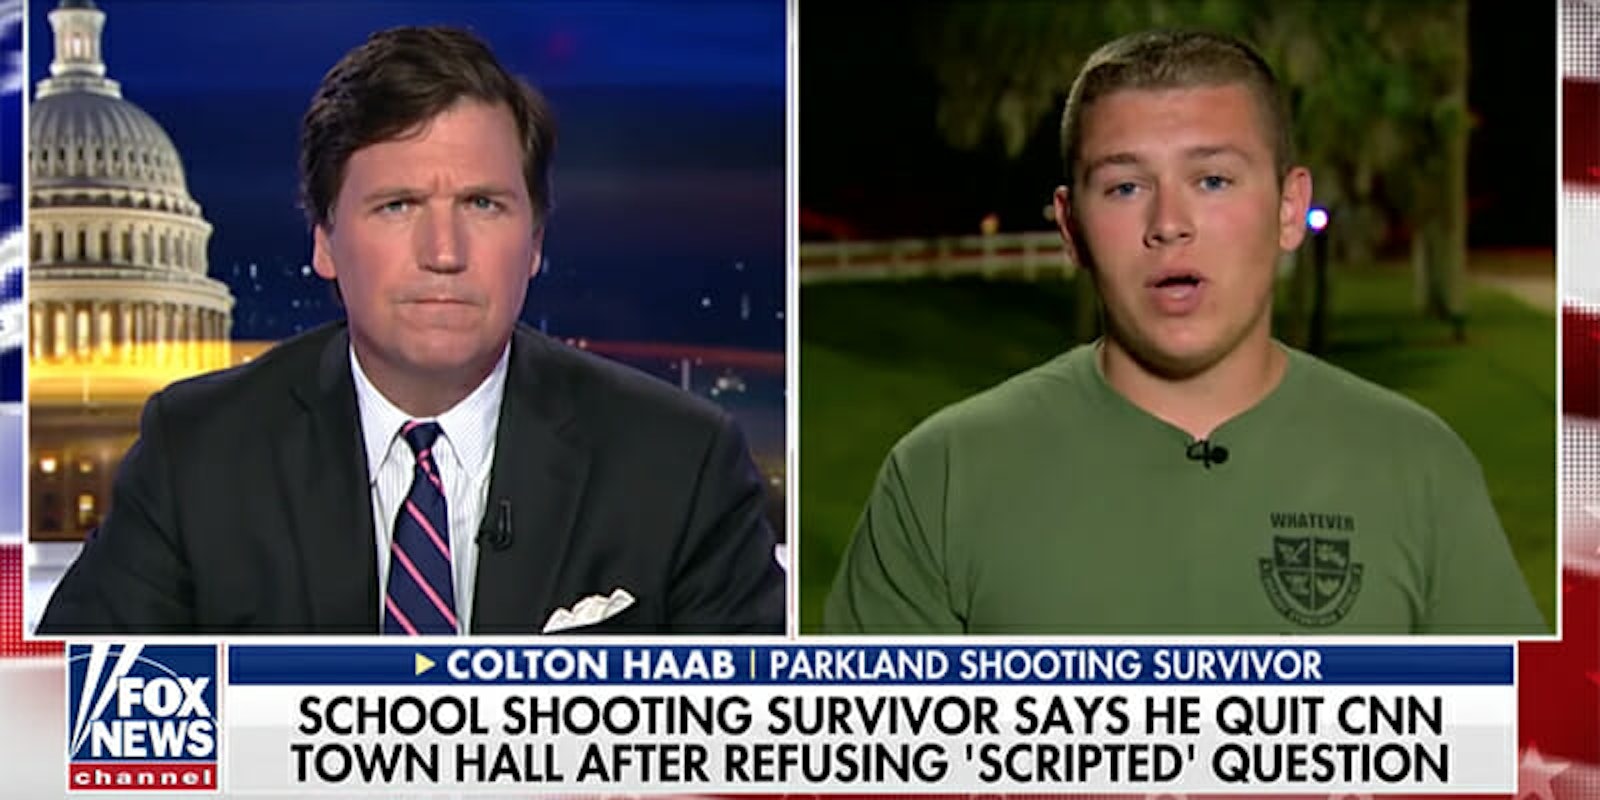 Parkland survivor Colton Haab's father admitted to altering an email in an exchange with CNN.